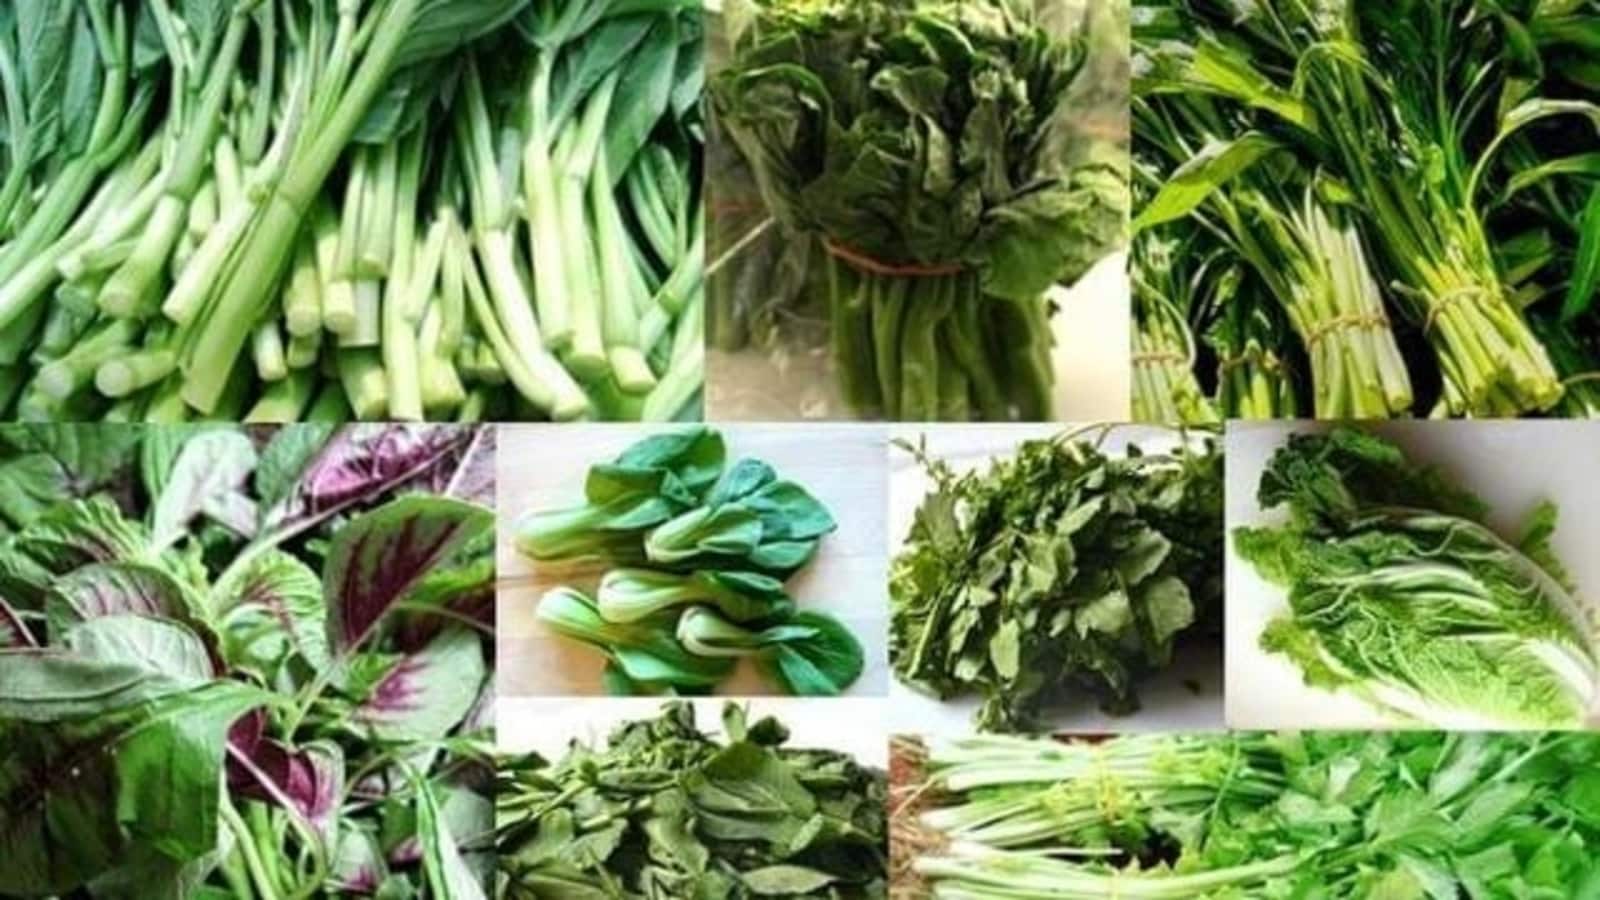 Leafy greens and cardiovascular function: Reduced risk of heart diseases, other benefits of plant-based diet